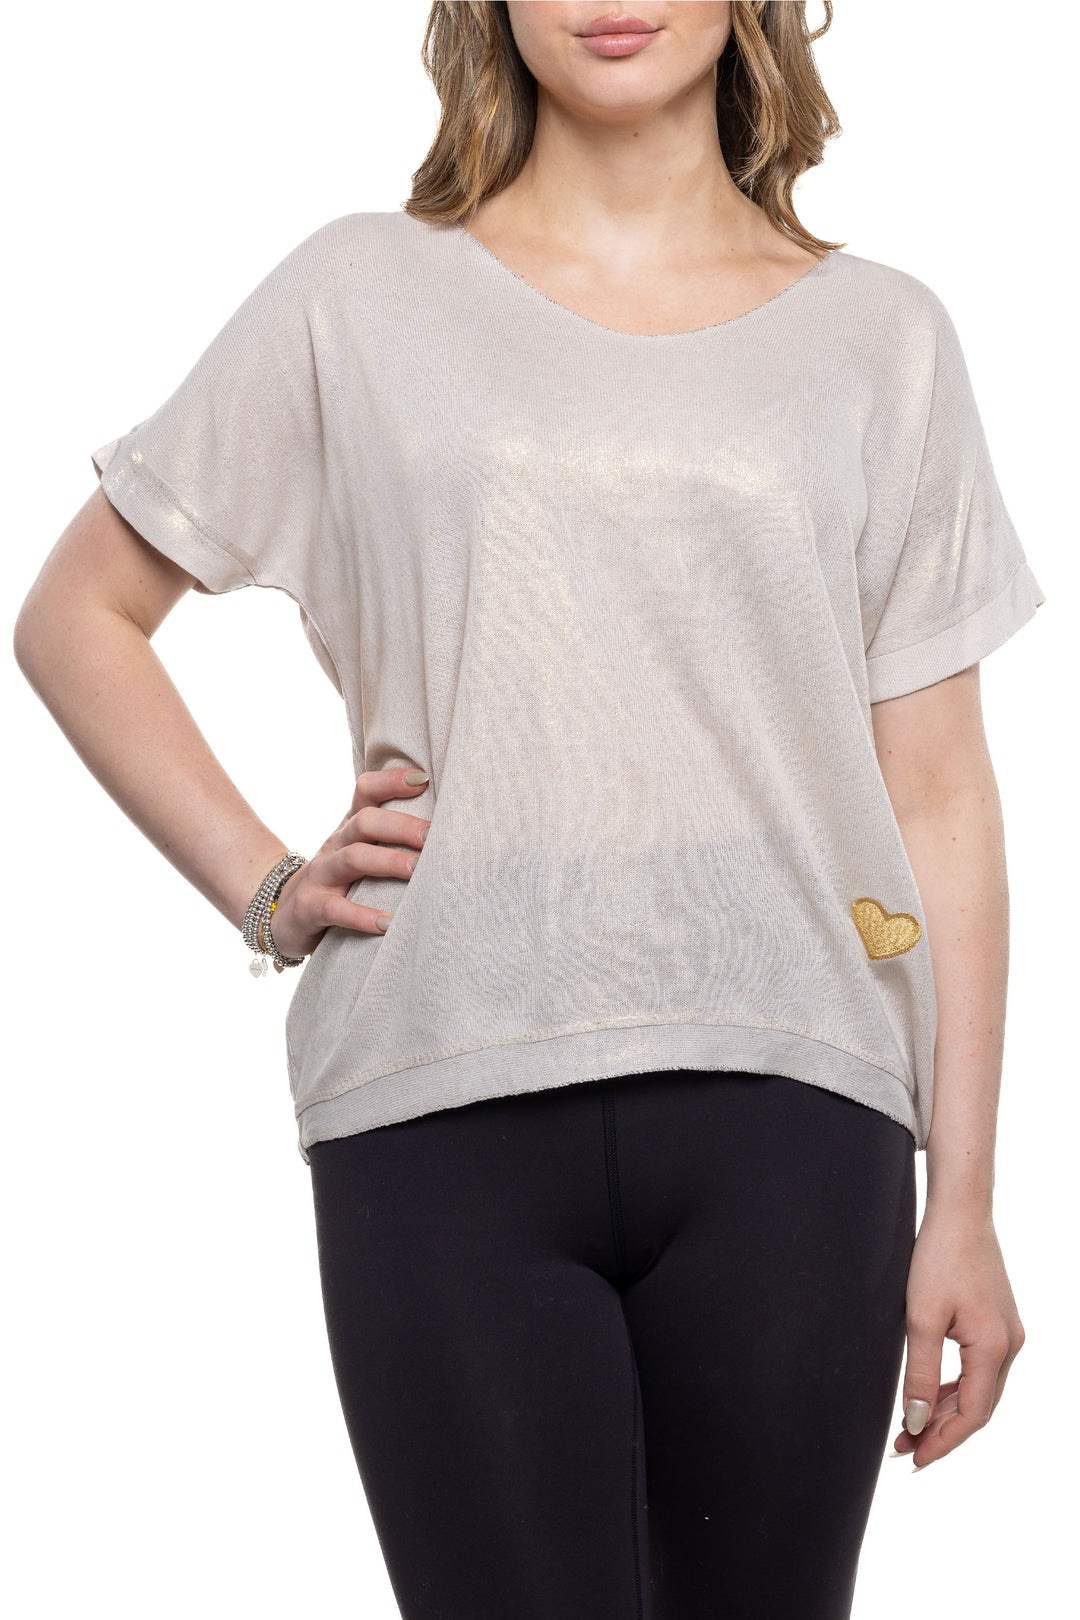 Etern Elle Summer 2024  The dolman cap sleeves and soft cut v-neck provide a flattering, loose fit. The finishing touch is a subtle silver sparkle shine and a little cute gold heart stitched in the corner. 